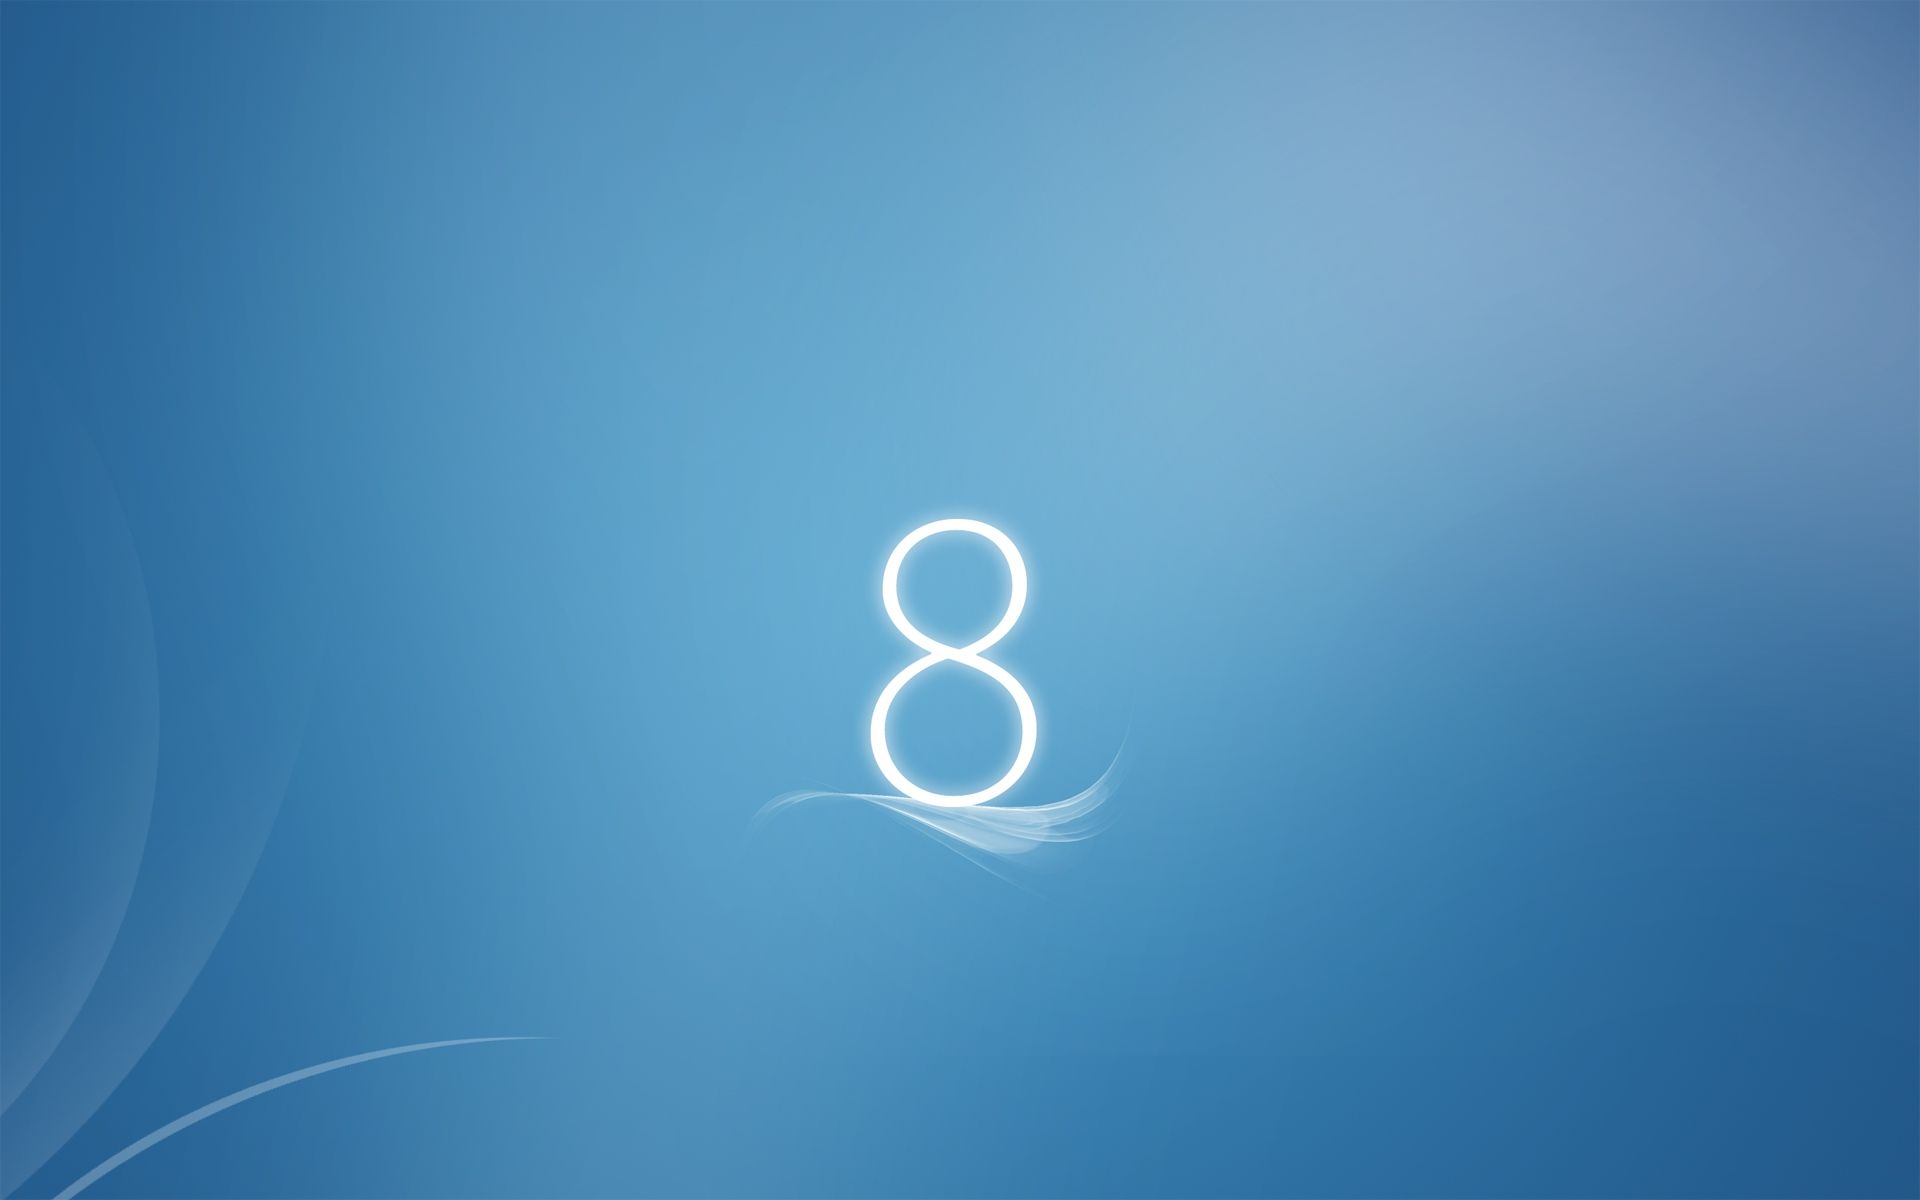 Win 8 Wallpapers favourites by sagorpirbd on DeviantArt